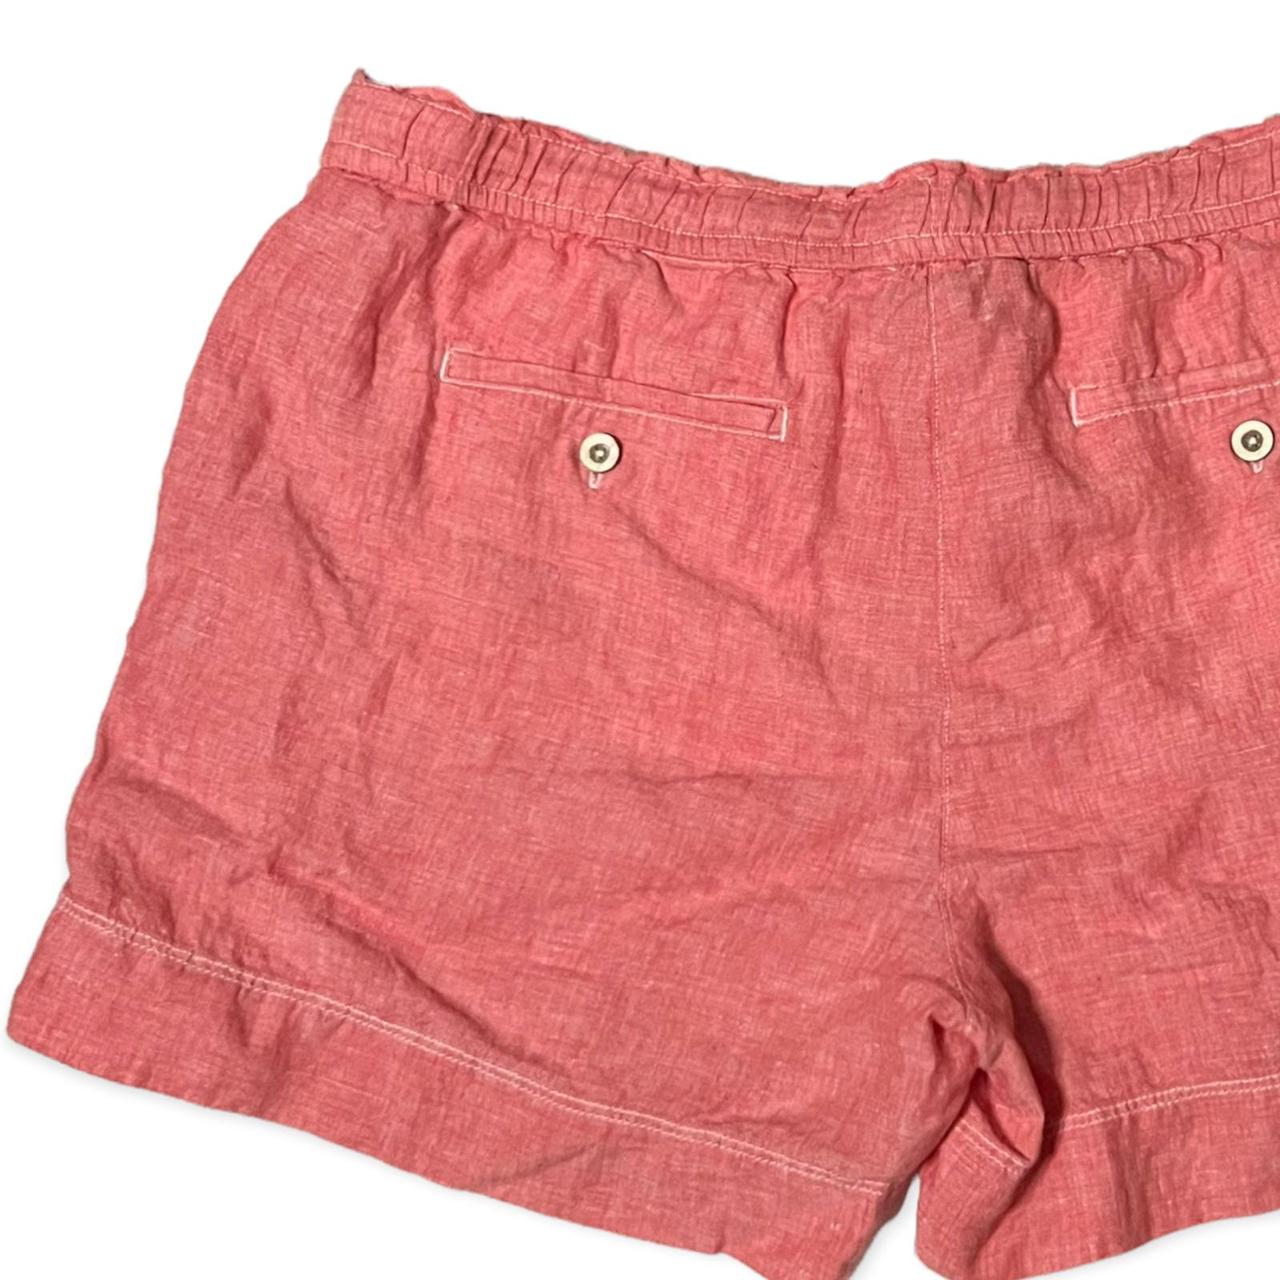 Product Image 3 - Tommy Bahama Women's Coral High-Waist